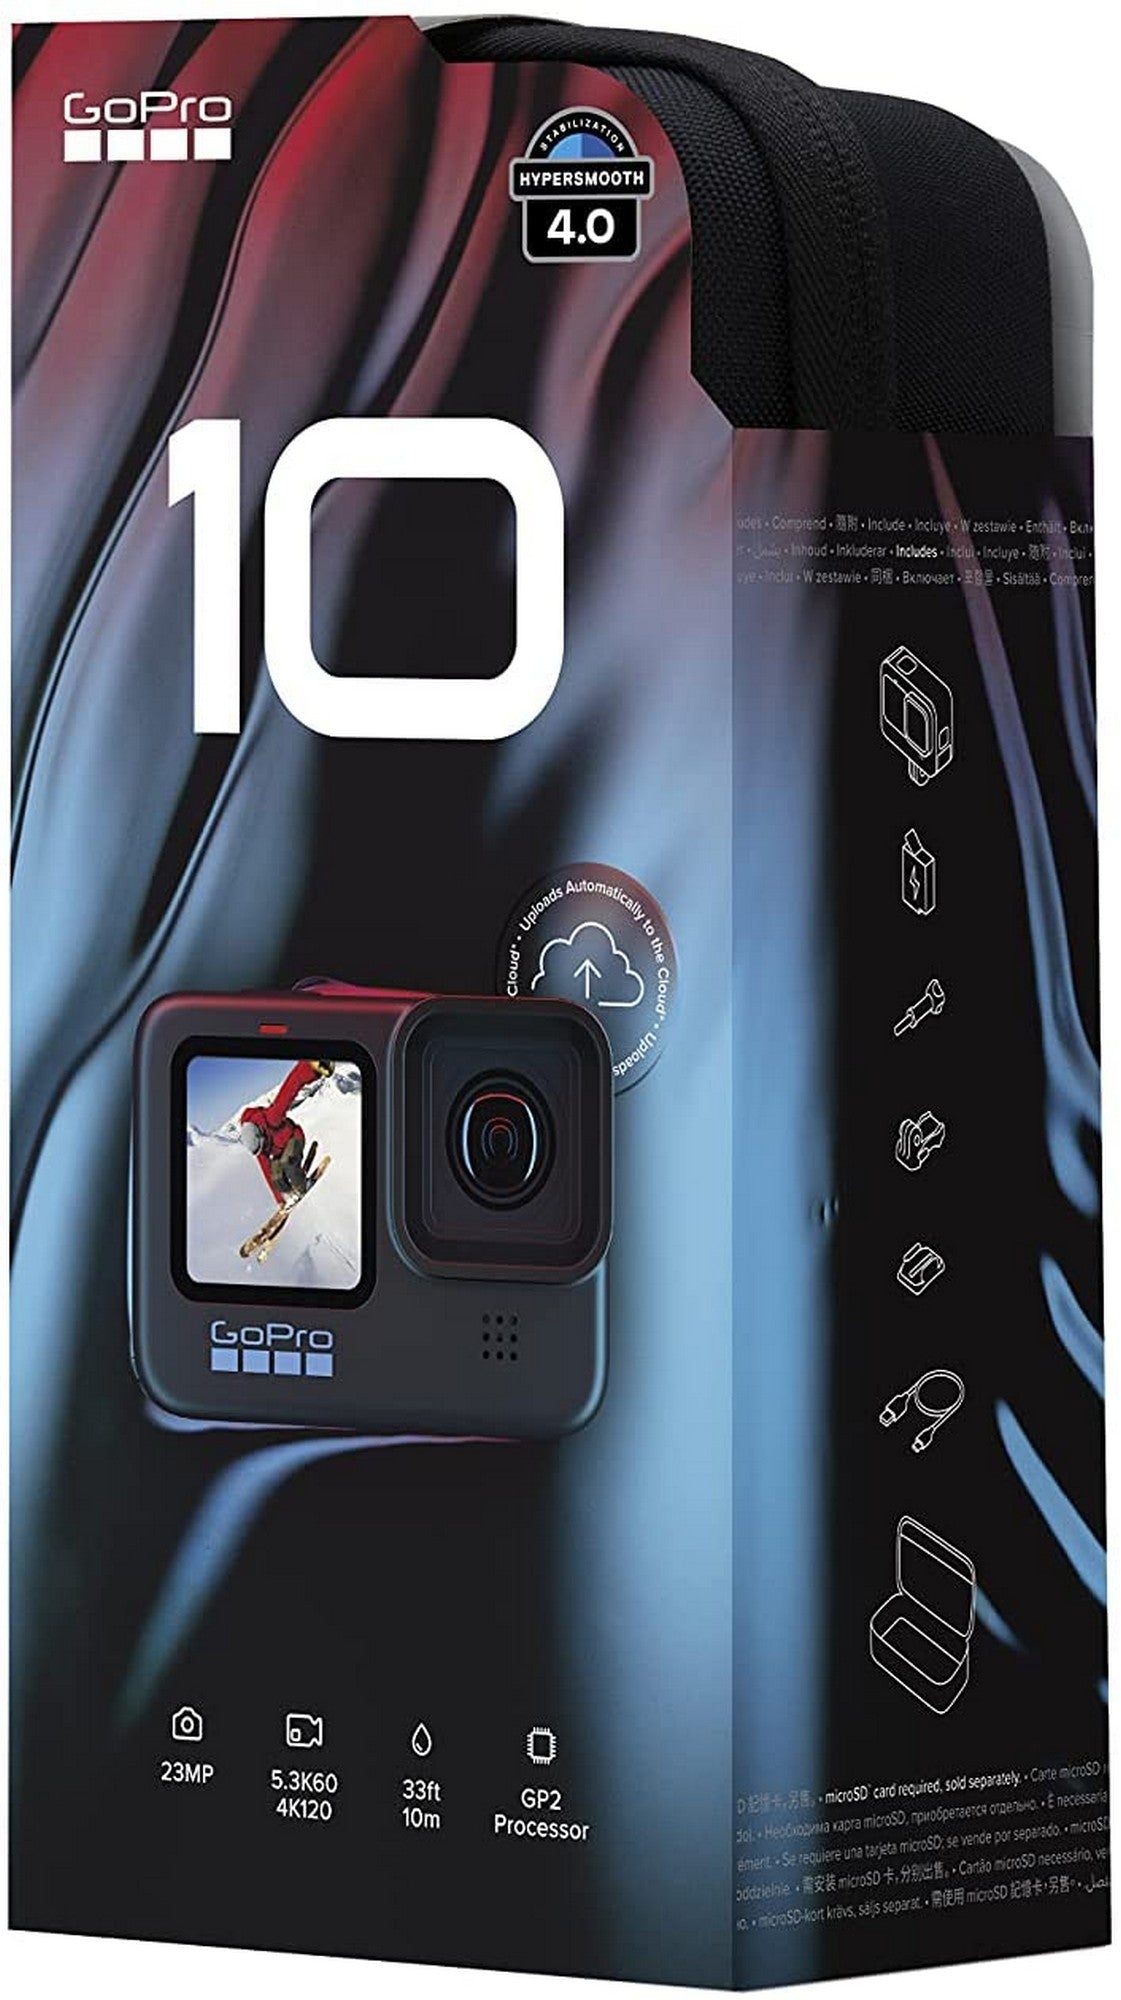 GoPro HERO10 Black - Waterproof Action Camera with Front LCD and Touch Rear Screens｜5.3K 60 Ultra HD Video｜23MP Photos｜1080p Live Streaming - package